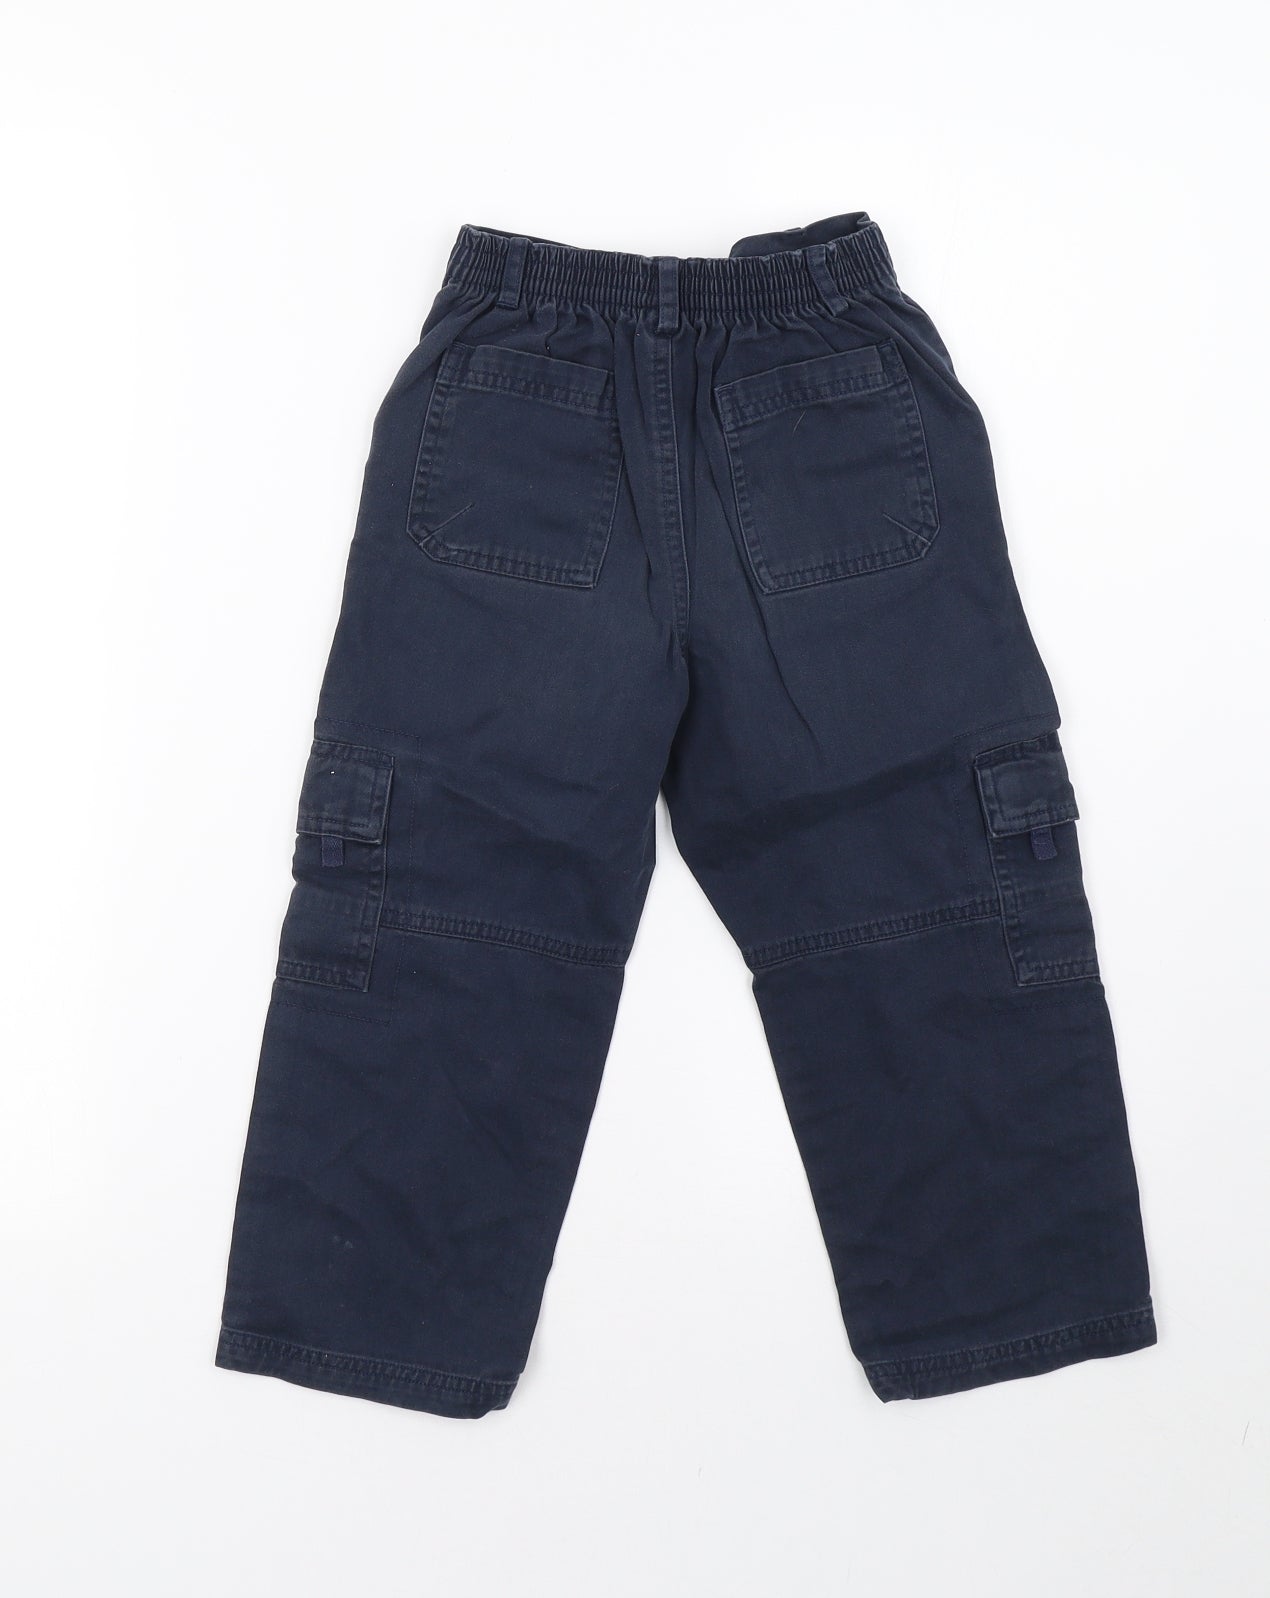 Tesco Boys Blue    Trousers Size 3-4 Years